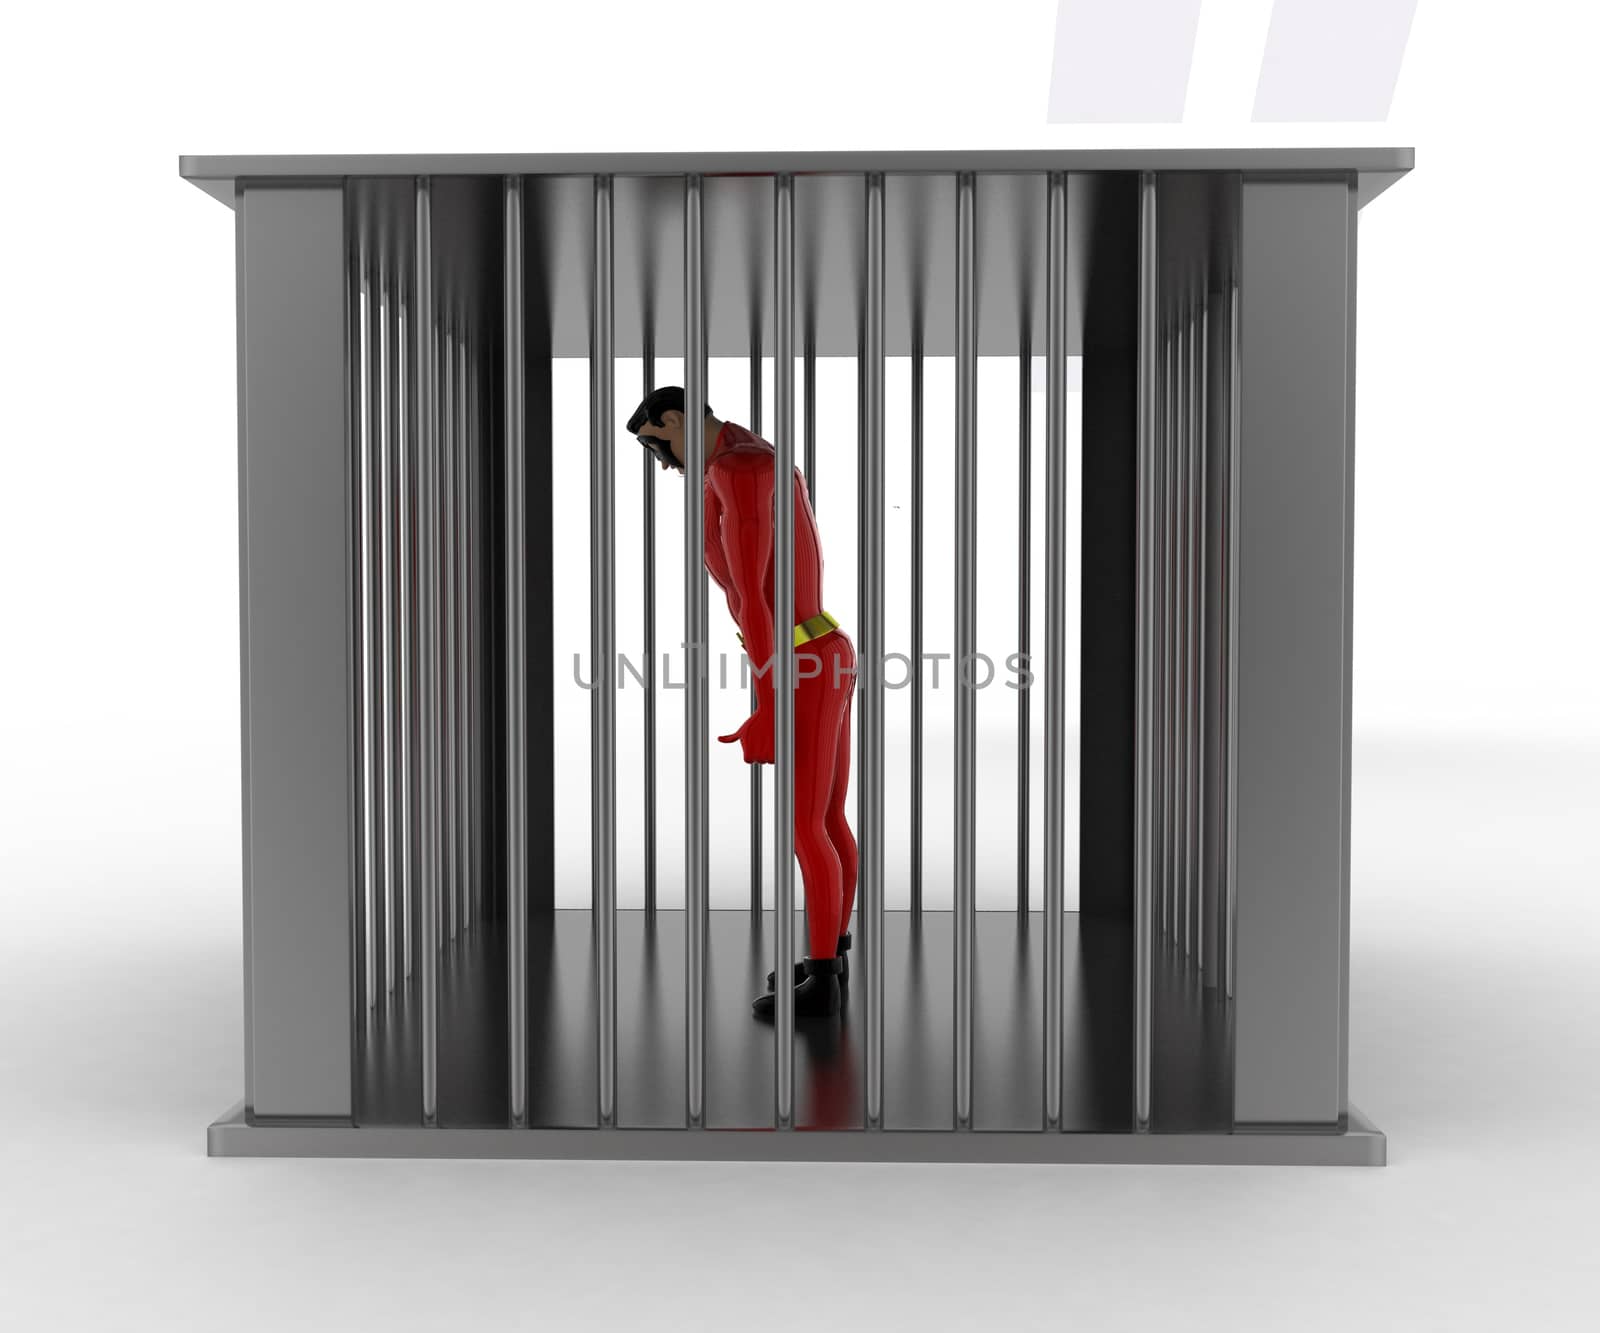 3d superhero into bar jail concept on white background, side angle view